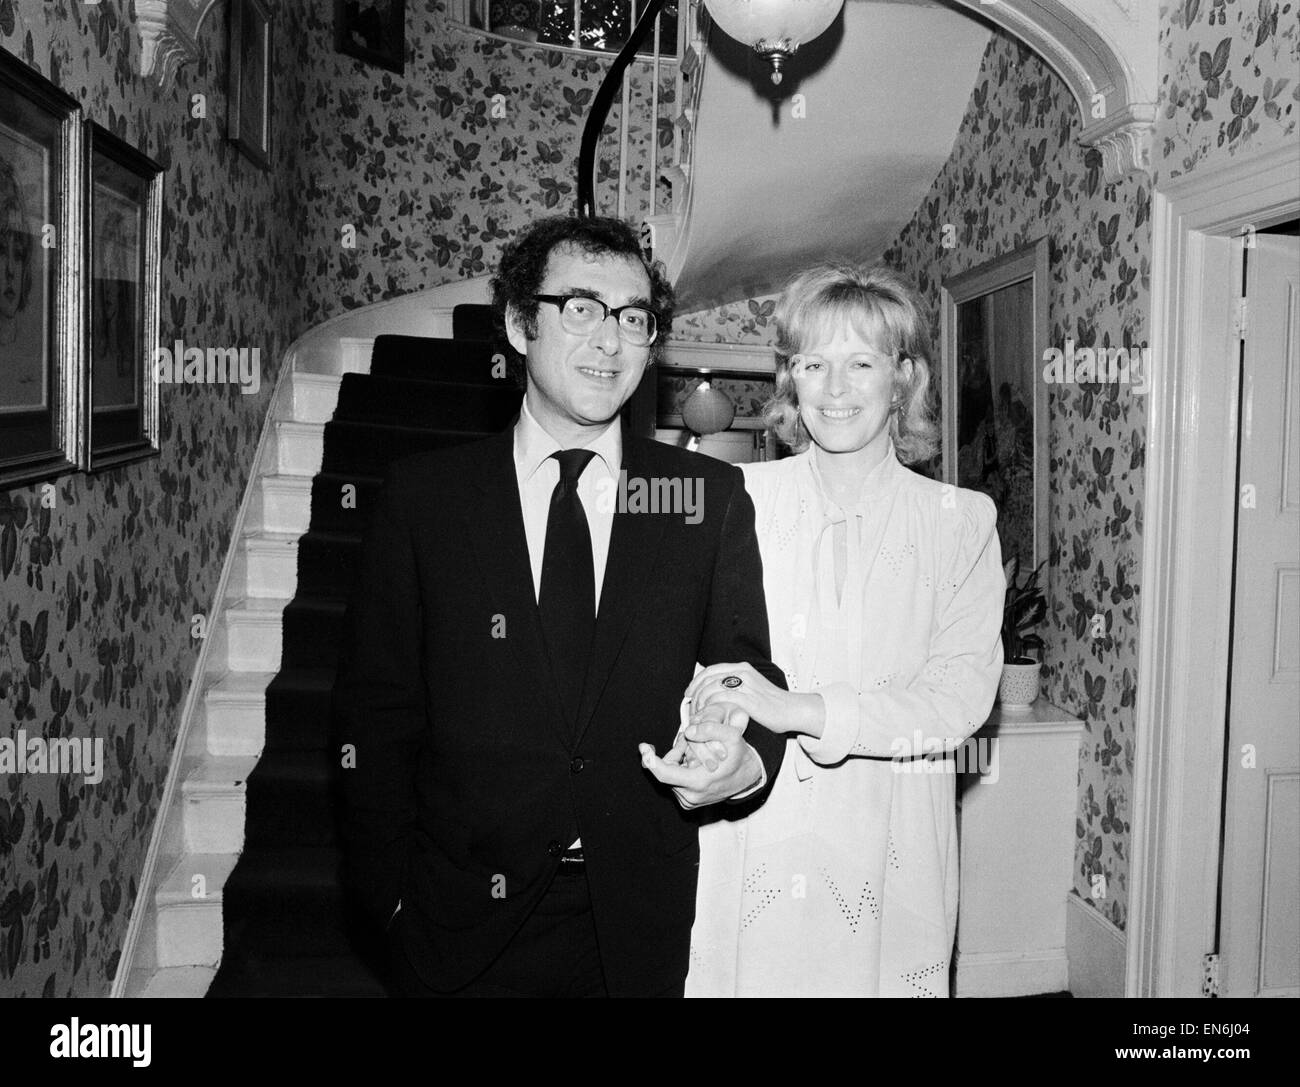 Playwright Harold Pinter and author Lady Antonia Fraser pictured together in the hallway of their house, 9th October 1980. It was reported that the couple have secretly married and after the ceremony they went back to a party at her home. Stock Photo